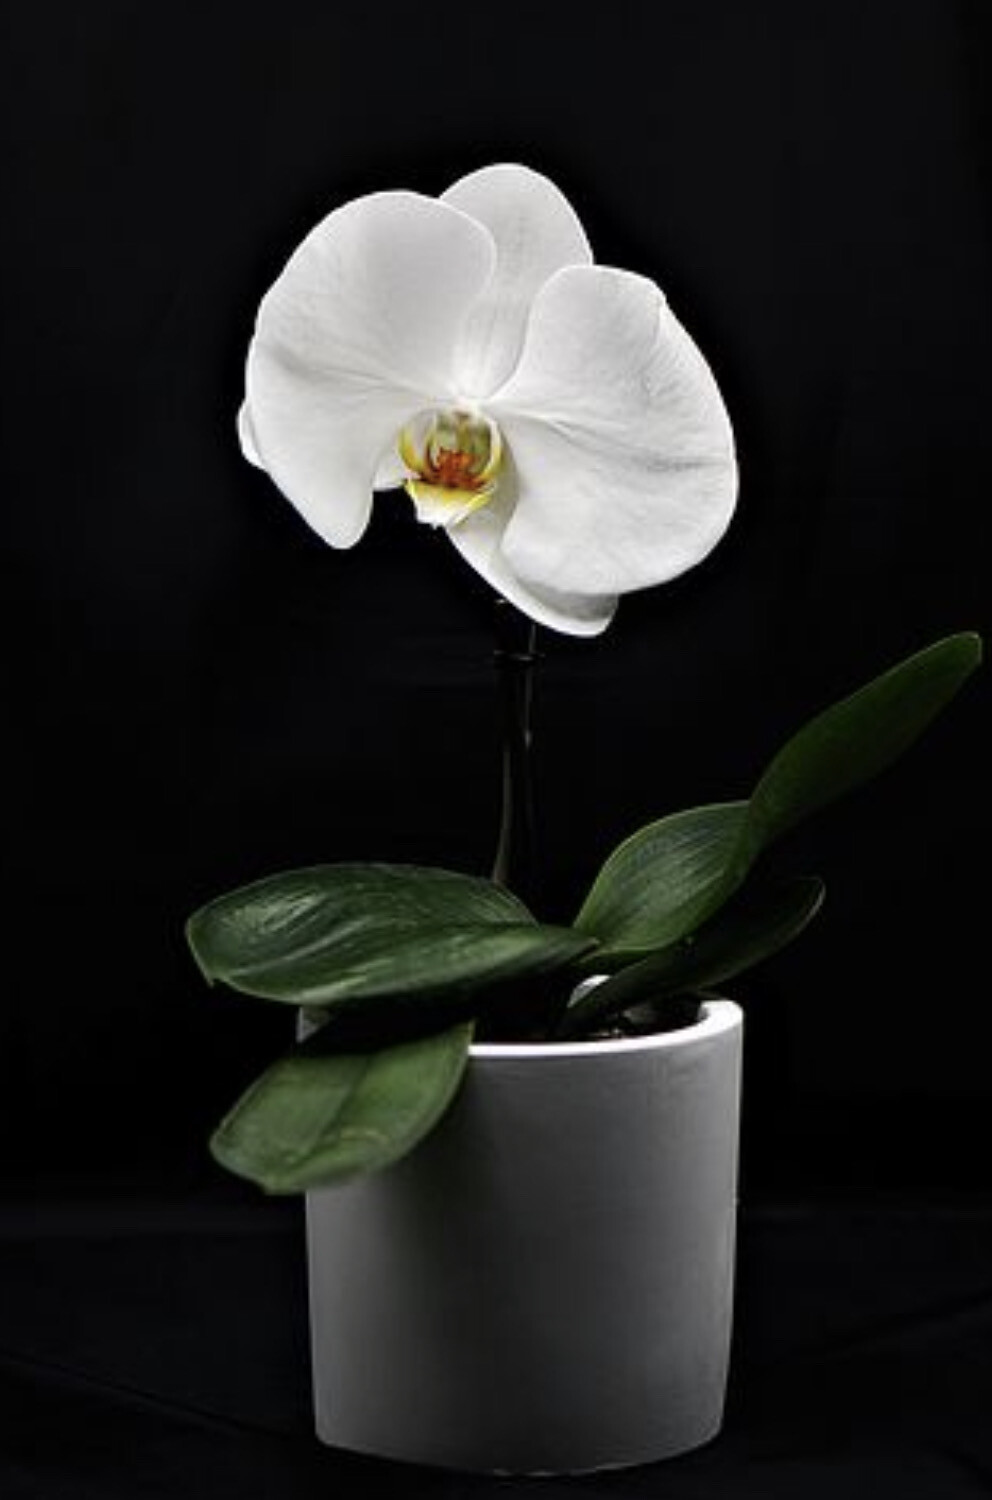 $70 Single Live Orchid Plant in Ceramic Planter - Orchid Color And Variety May Vary Based On Availability 